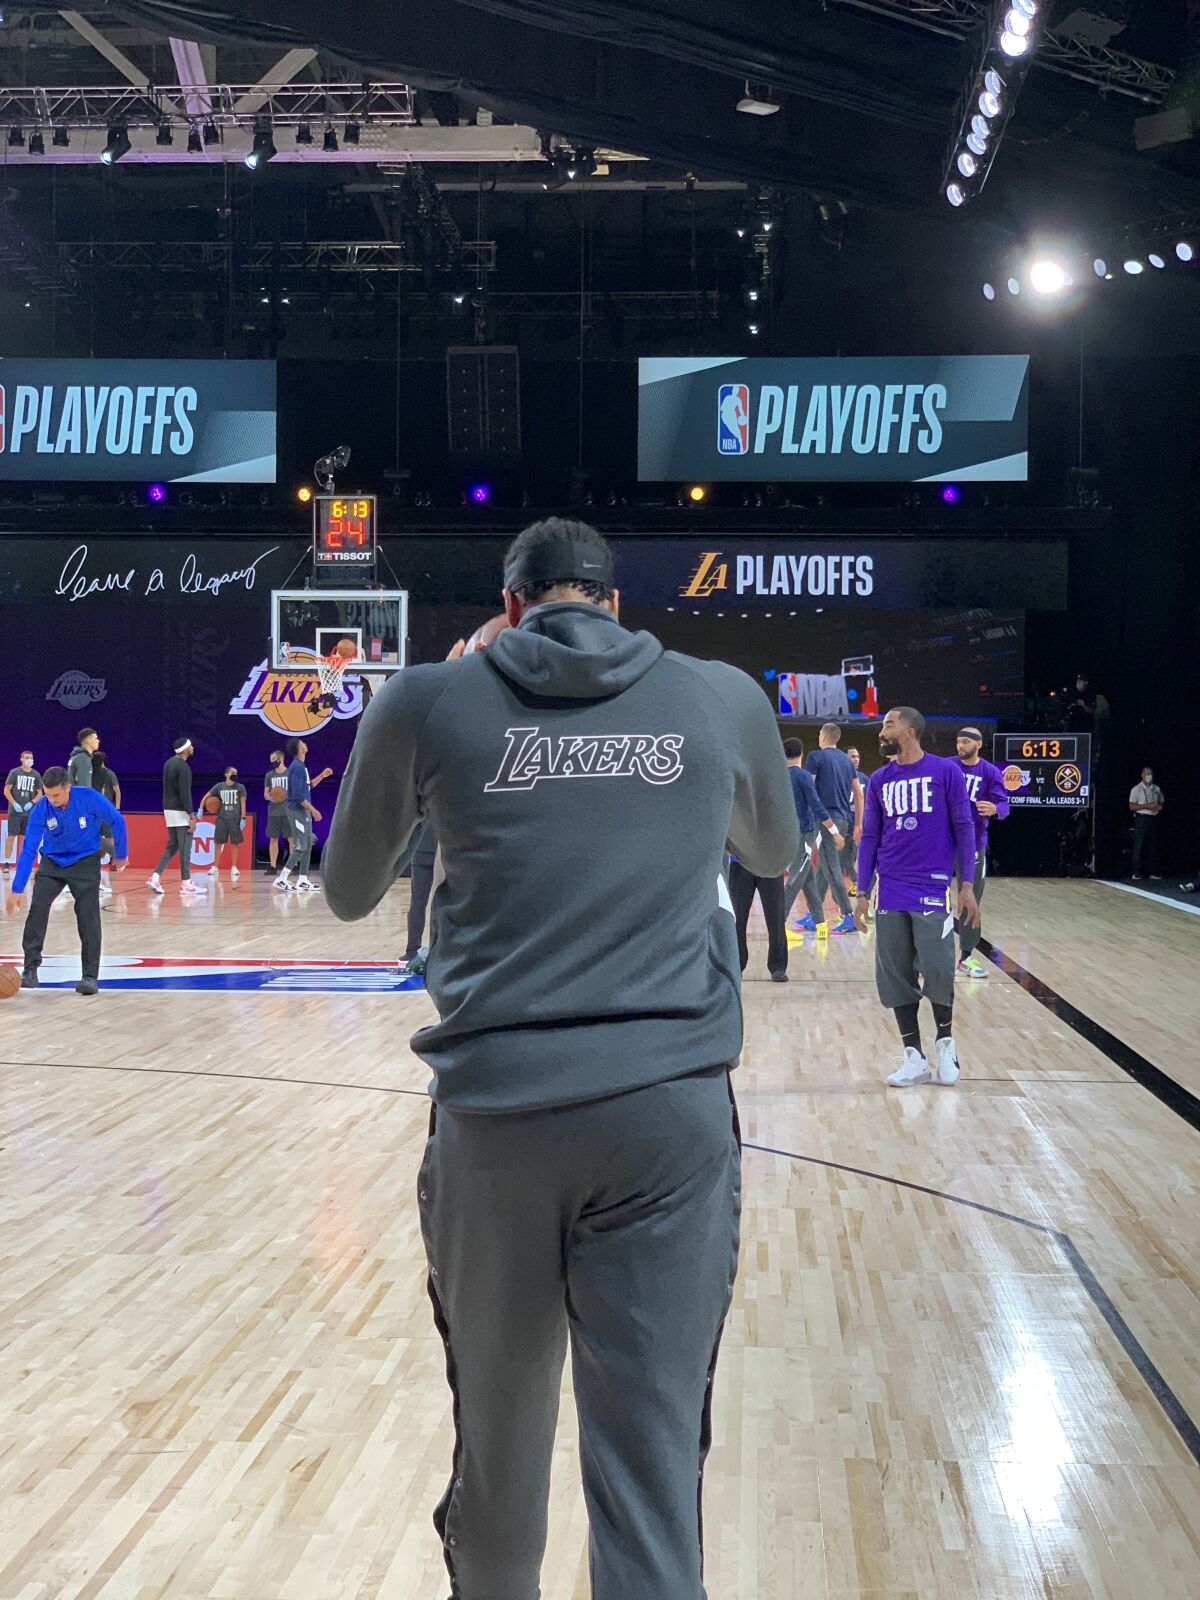 Anthony Davis jogs onto the court to join his Lakers teammates for practice.